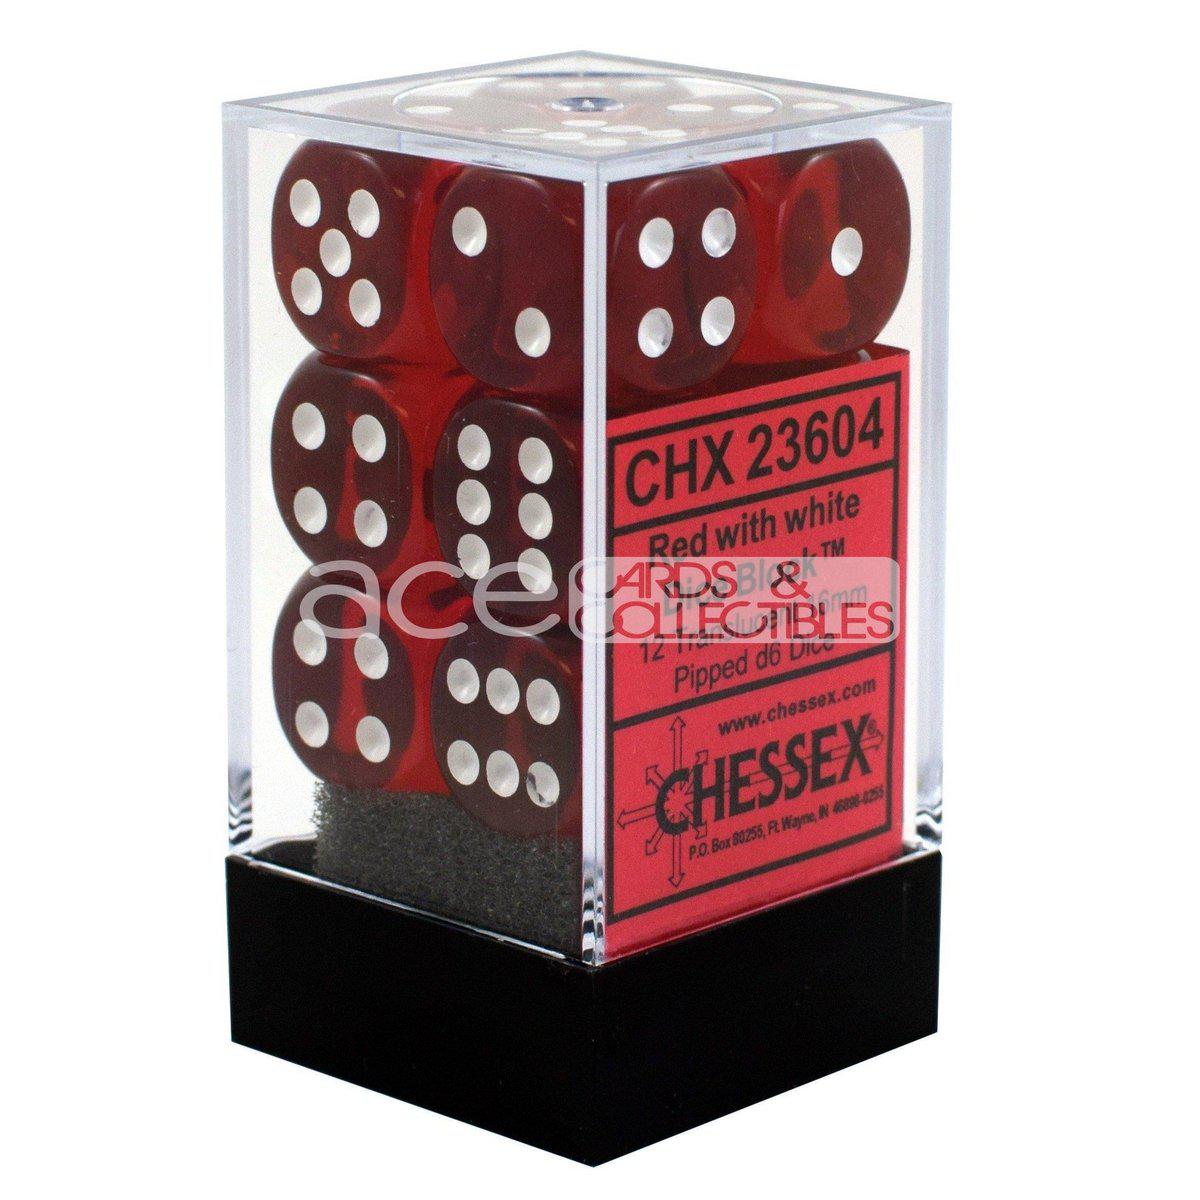 Chessex Translucent 16mm d6 12pcs Dice (Red/White) [CHX23604]-Chessex-Ace Cards & Collectibles